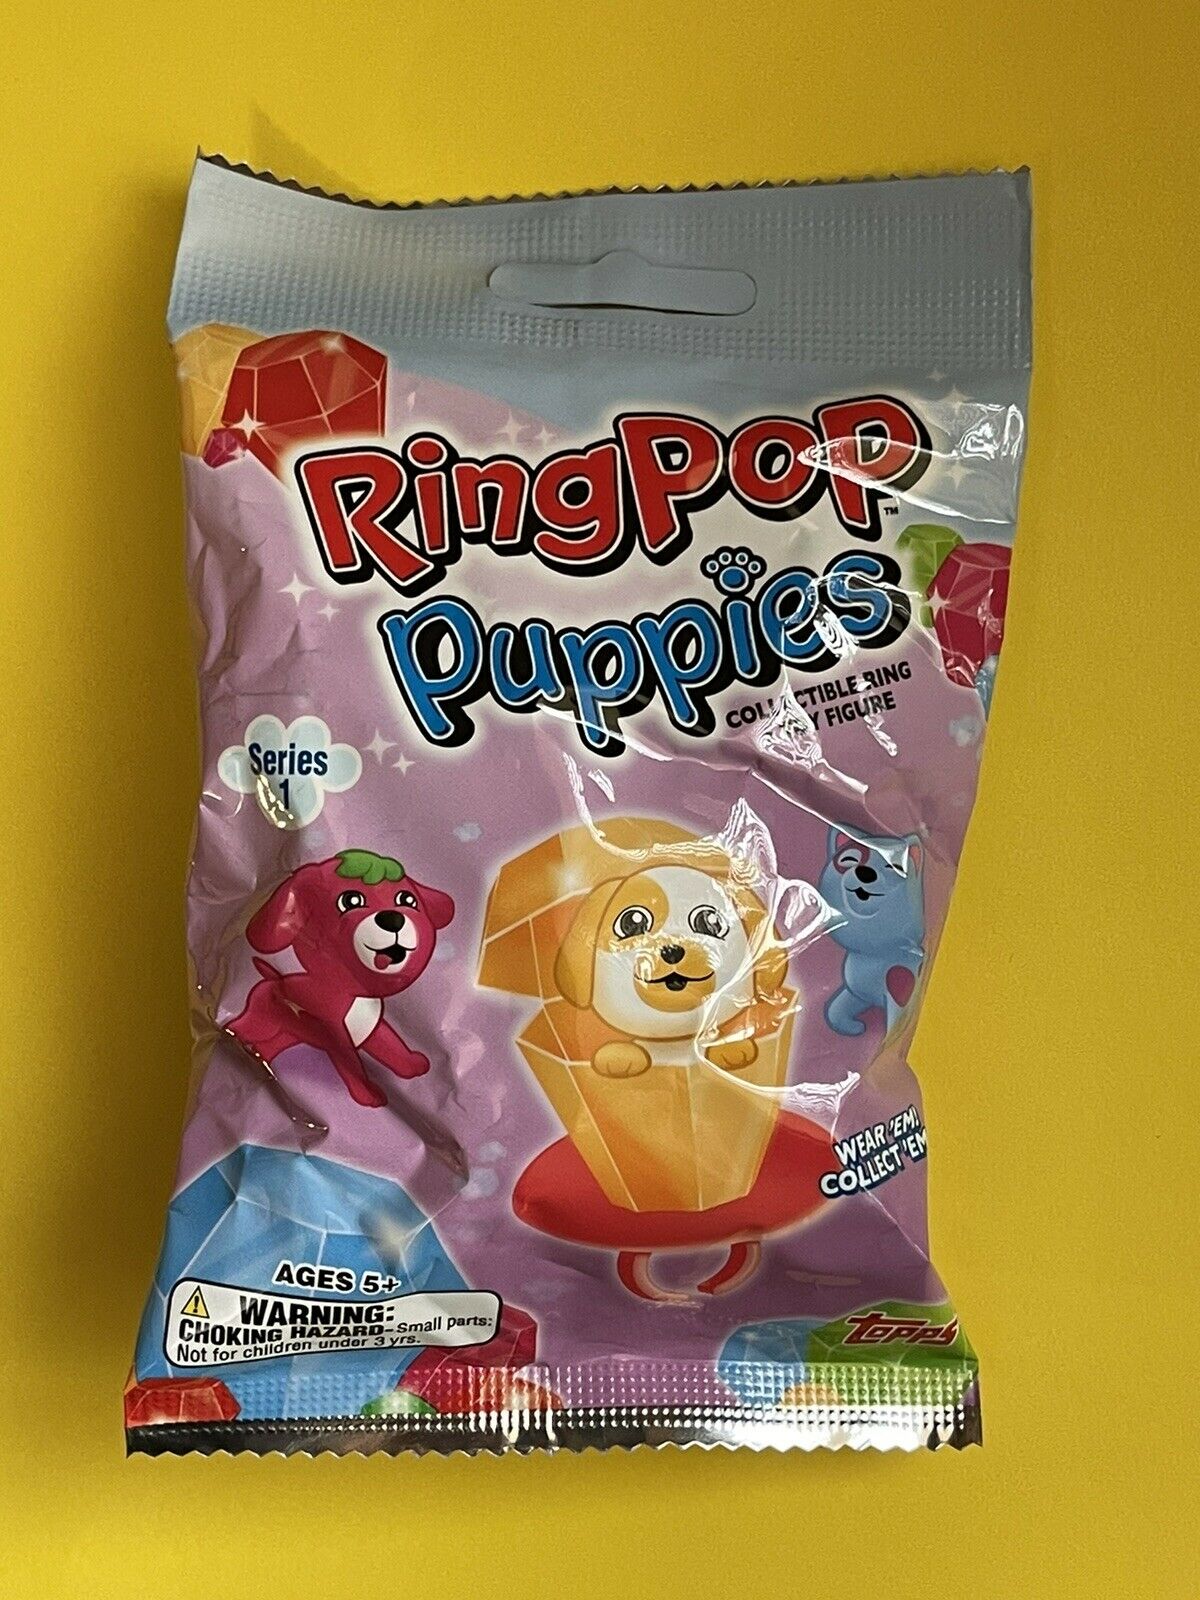 Topps Ringpop Puppies Collectible Ring Toy Figure ~ One Random Pack - New! 💥